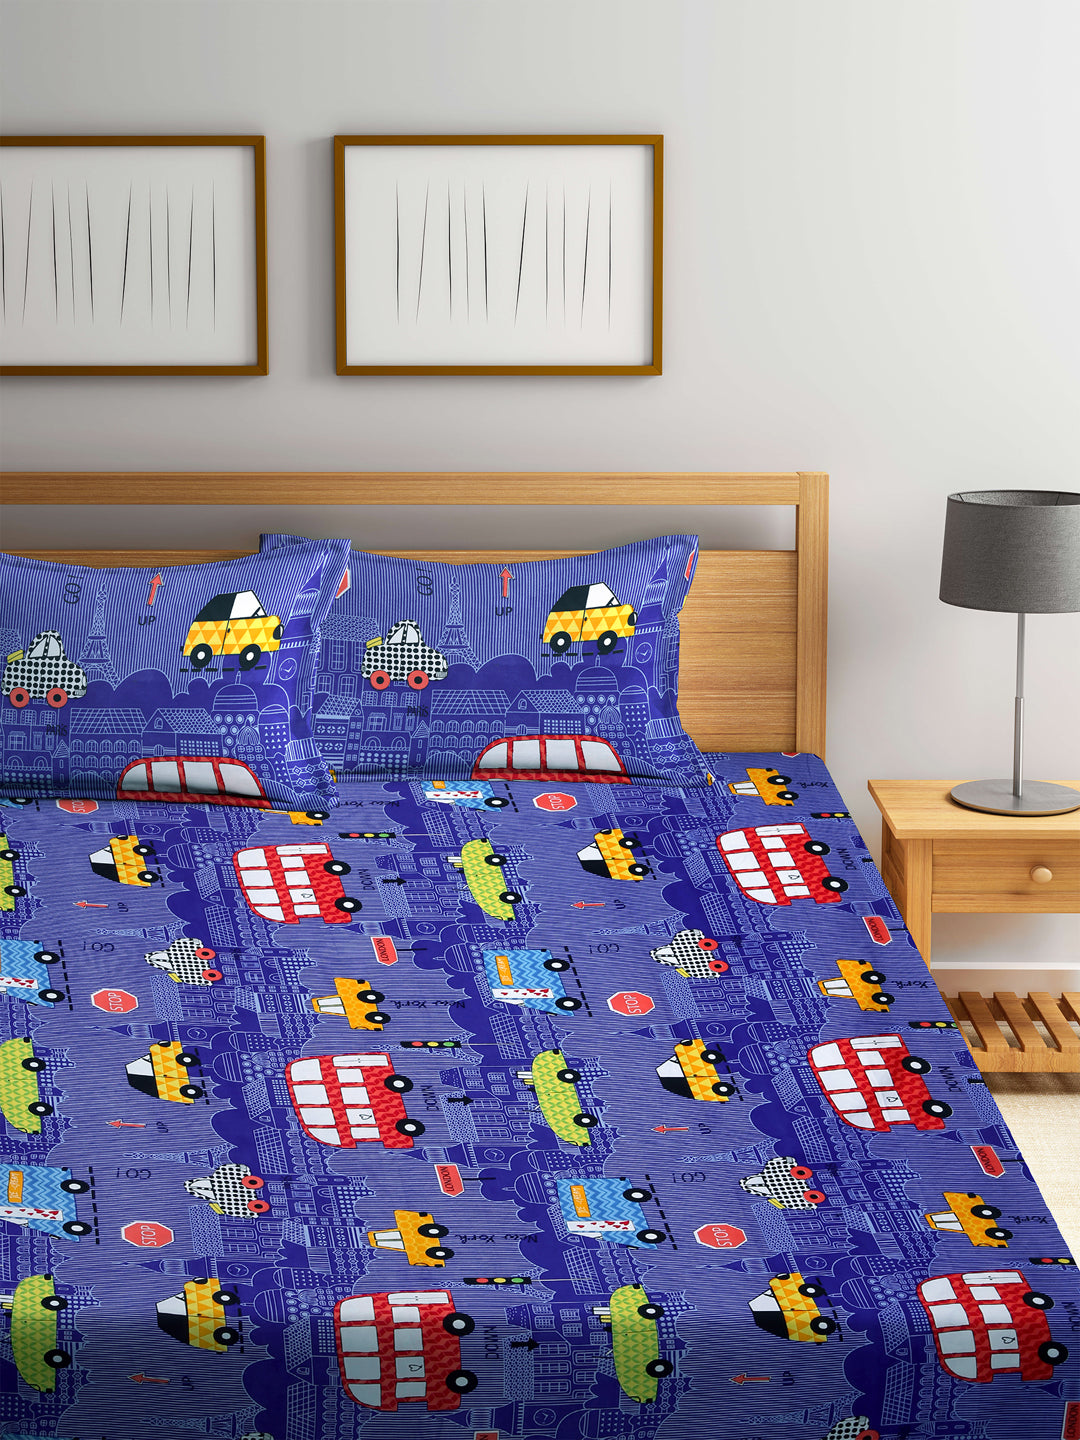 Special Kid's Edition Animal Bed Sheet Set with Two Pillow Covers by KLOTTHE®